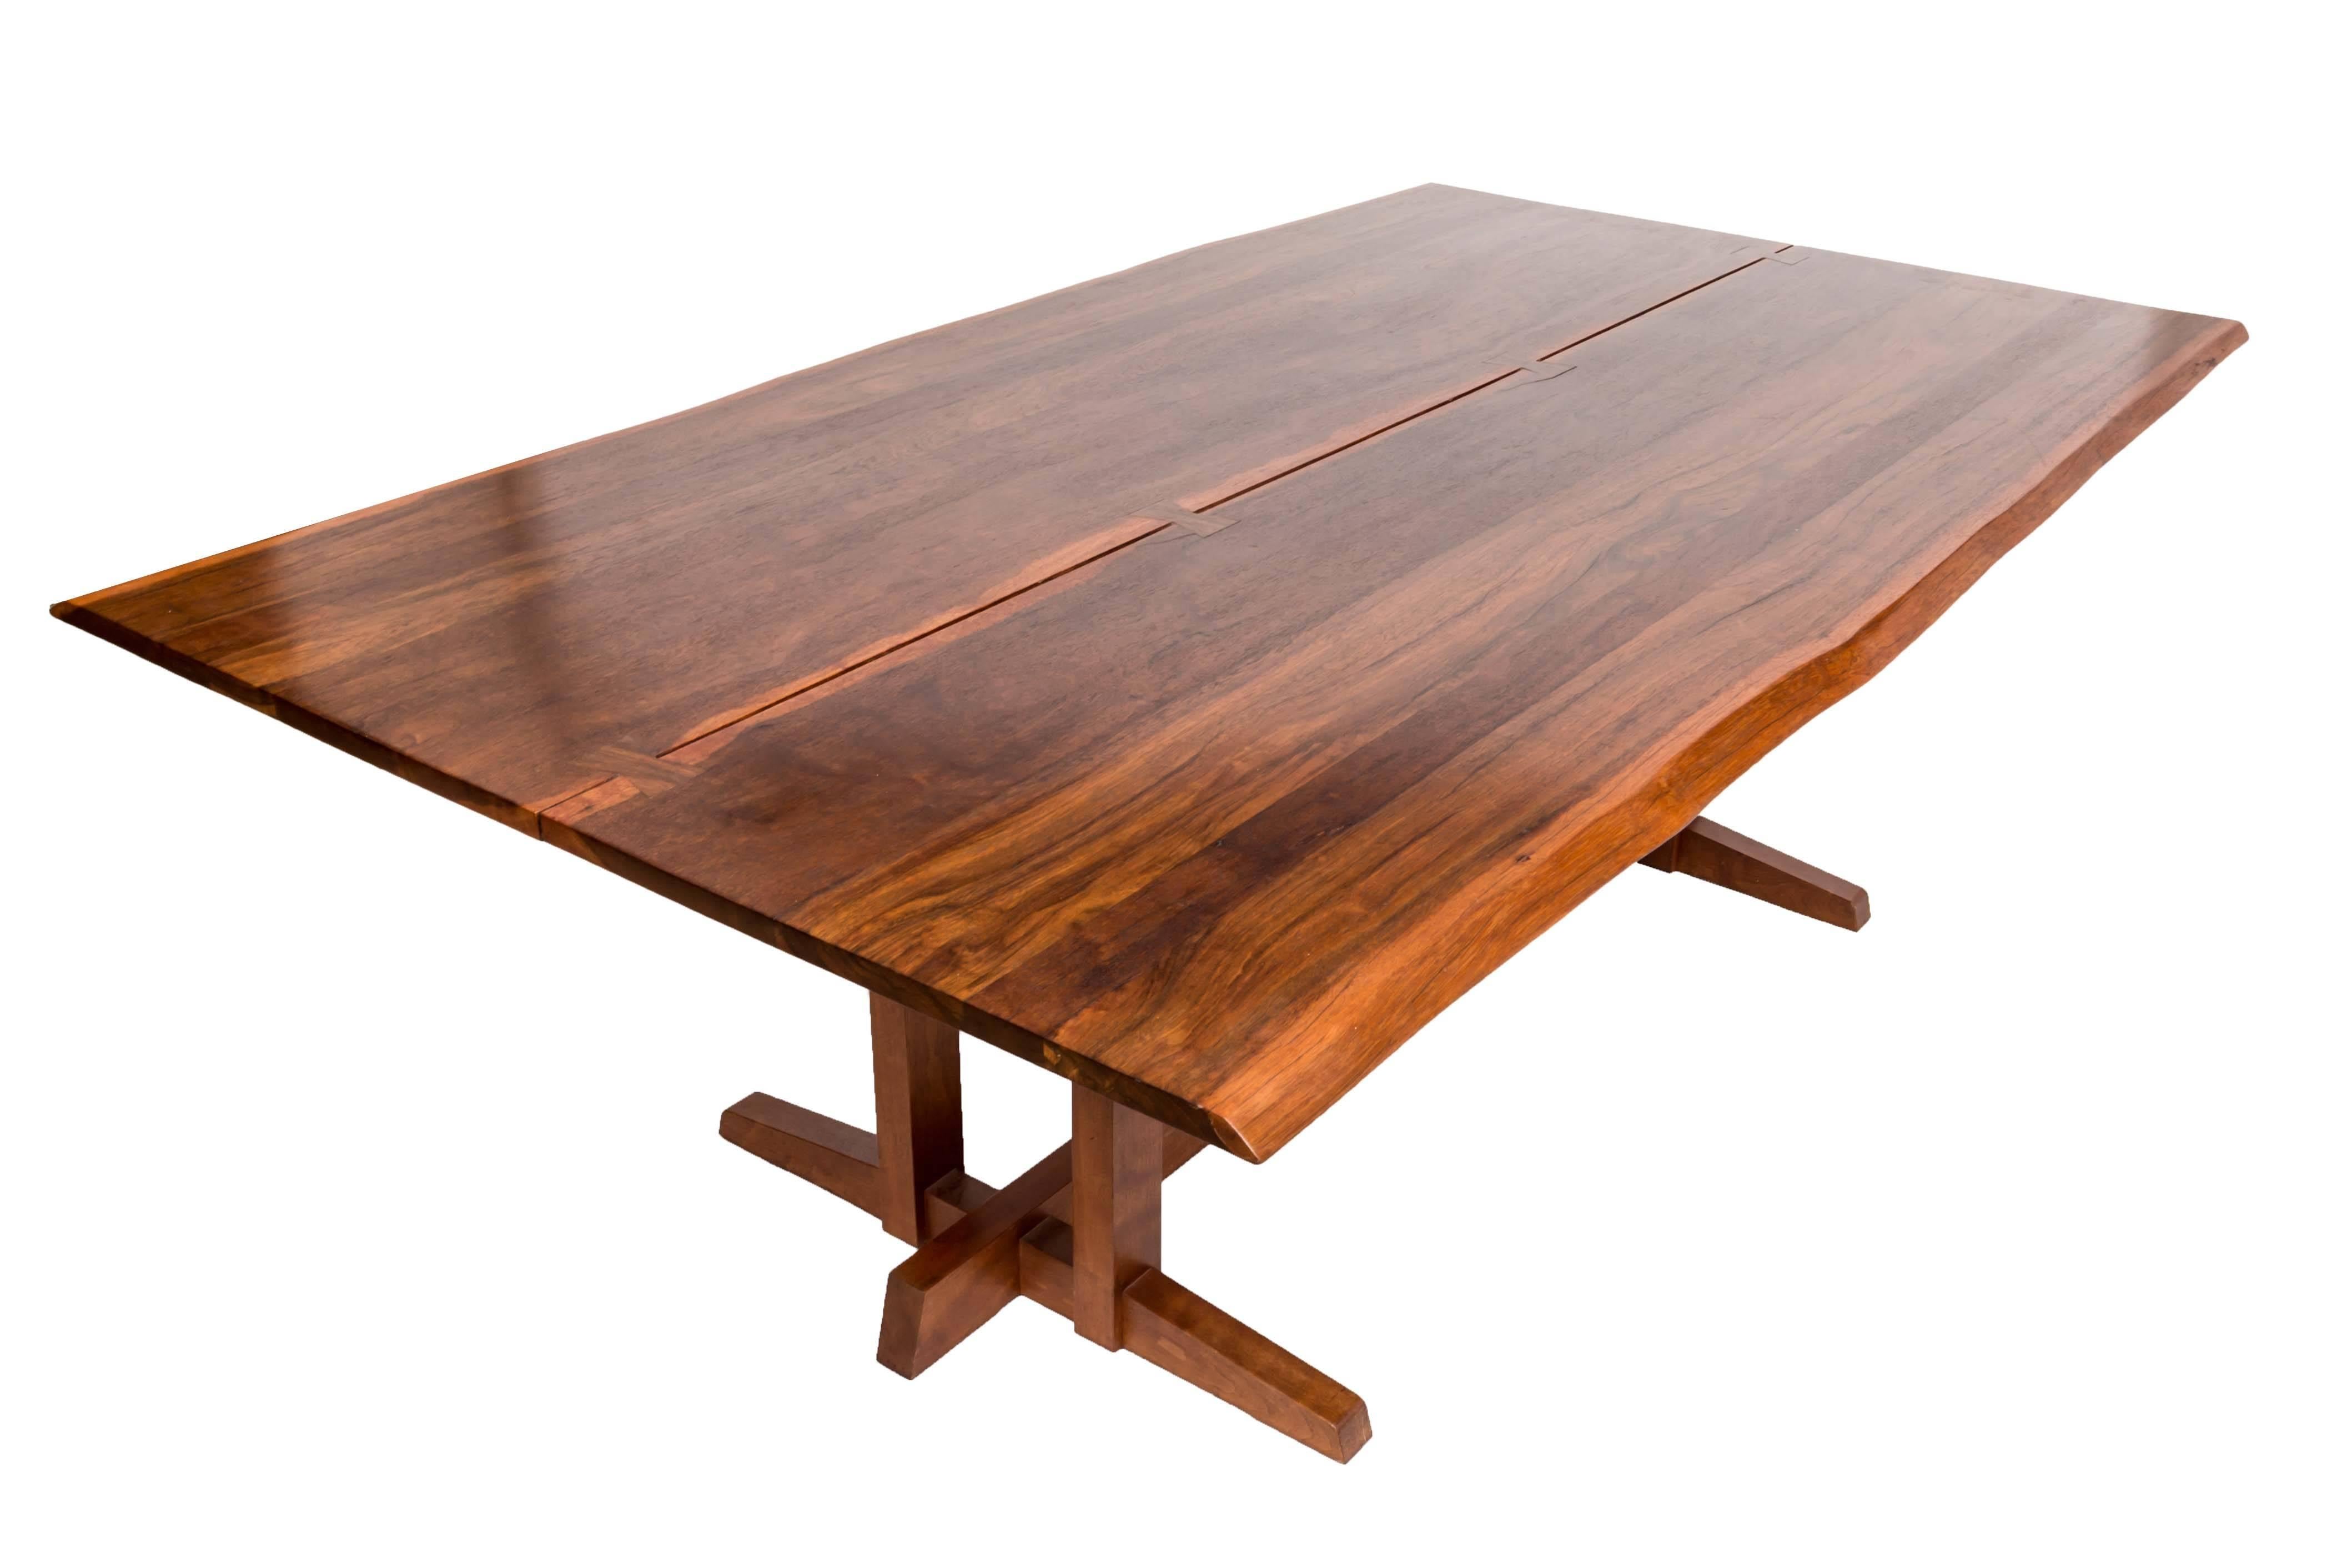 Hand-Crafted East Indian Laurel Frenchman Cove Dining Table by George Nakashima For Sale